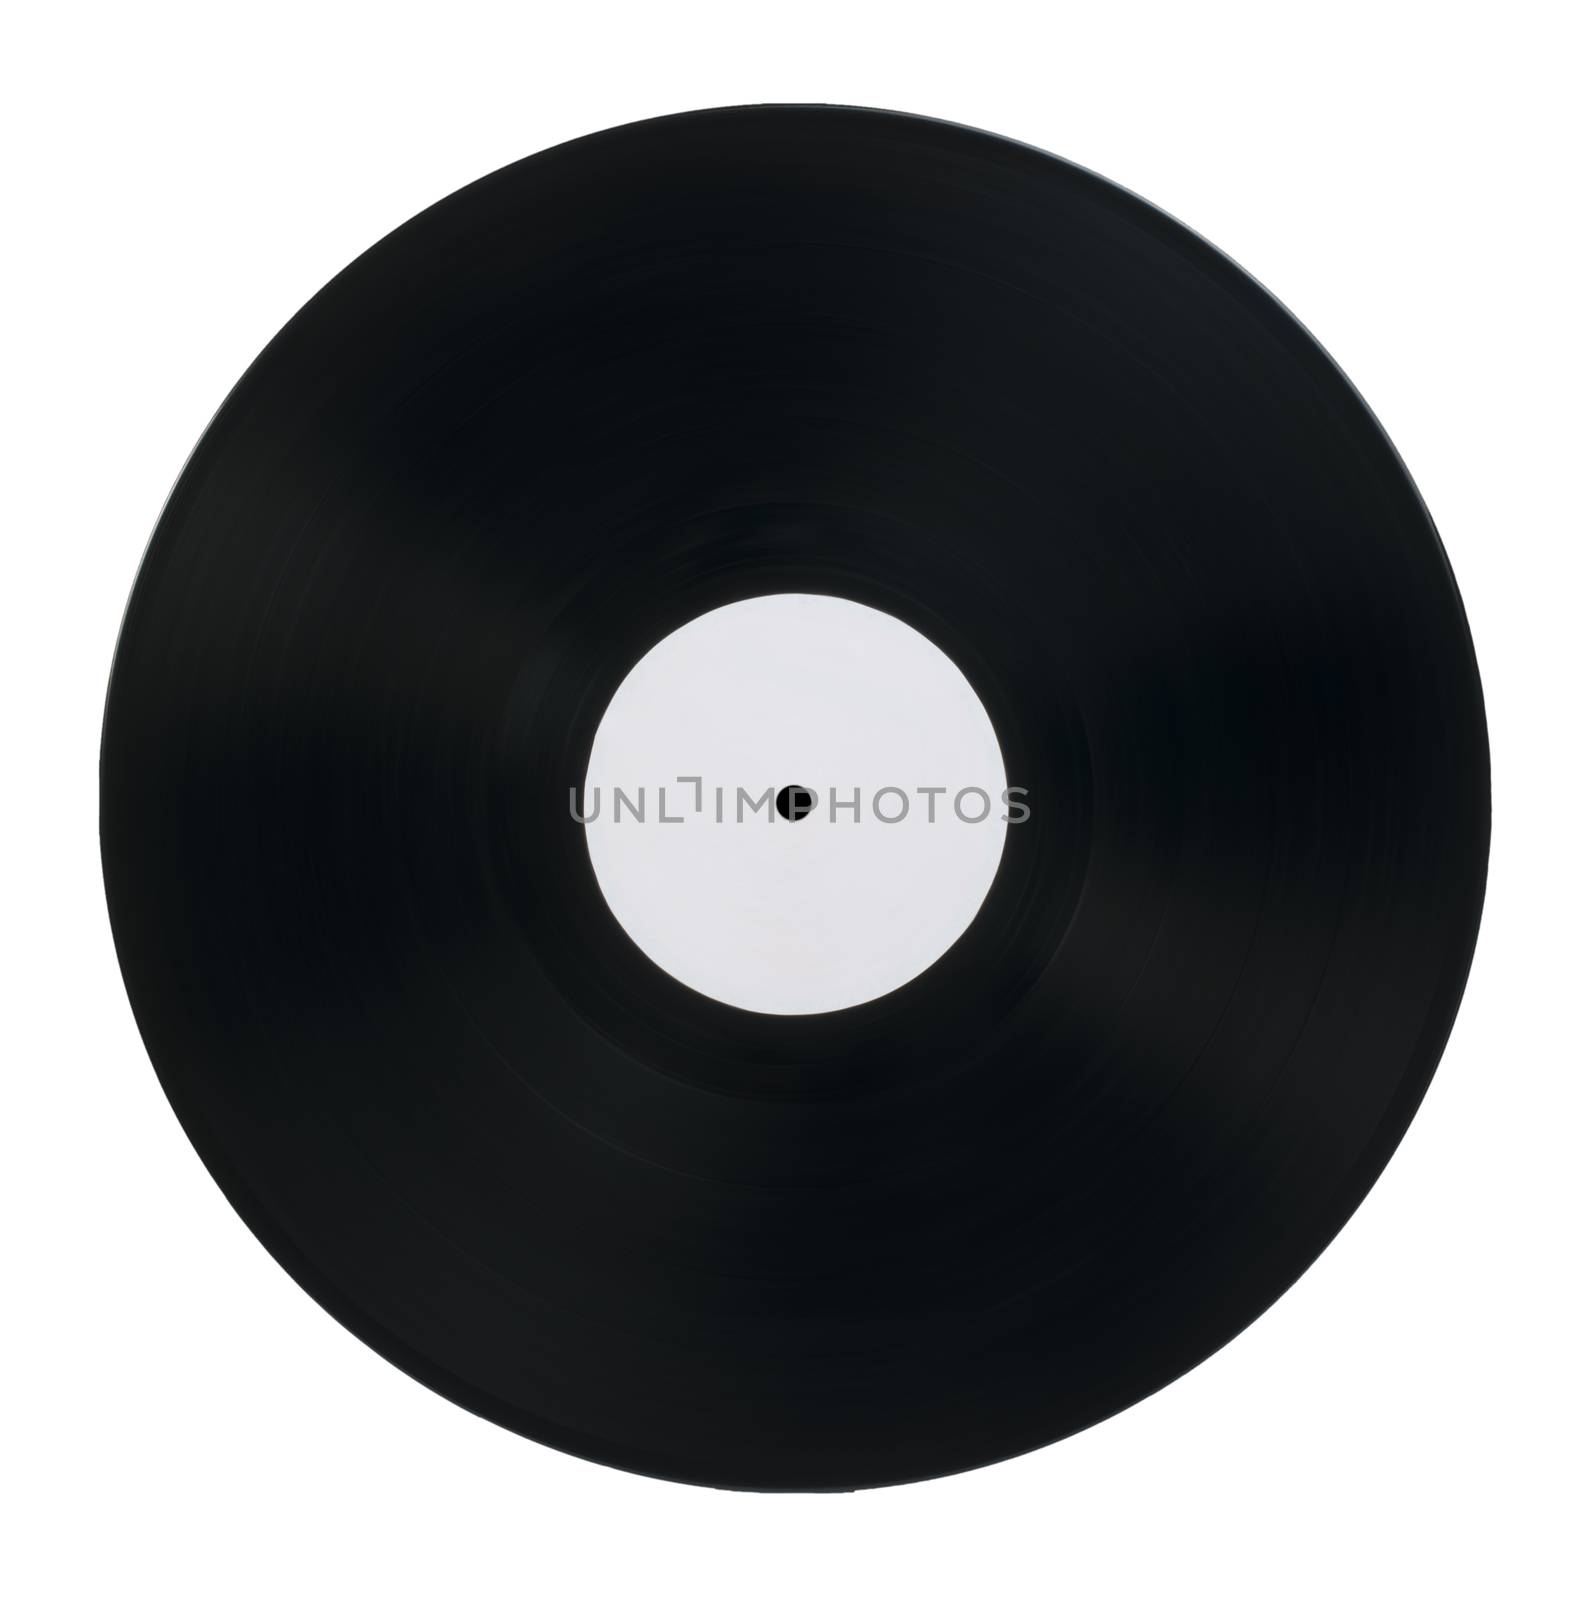 Vinil Record white isolated